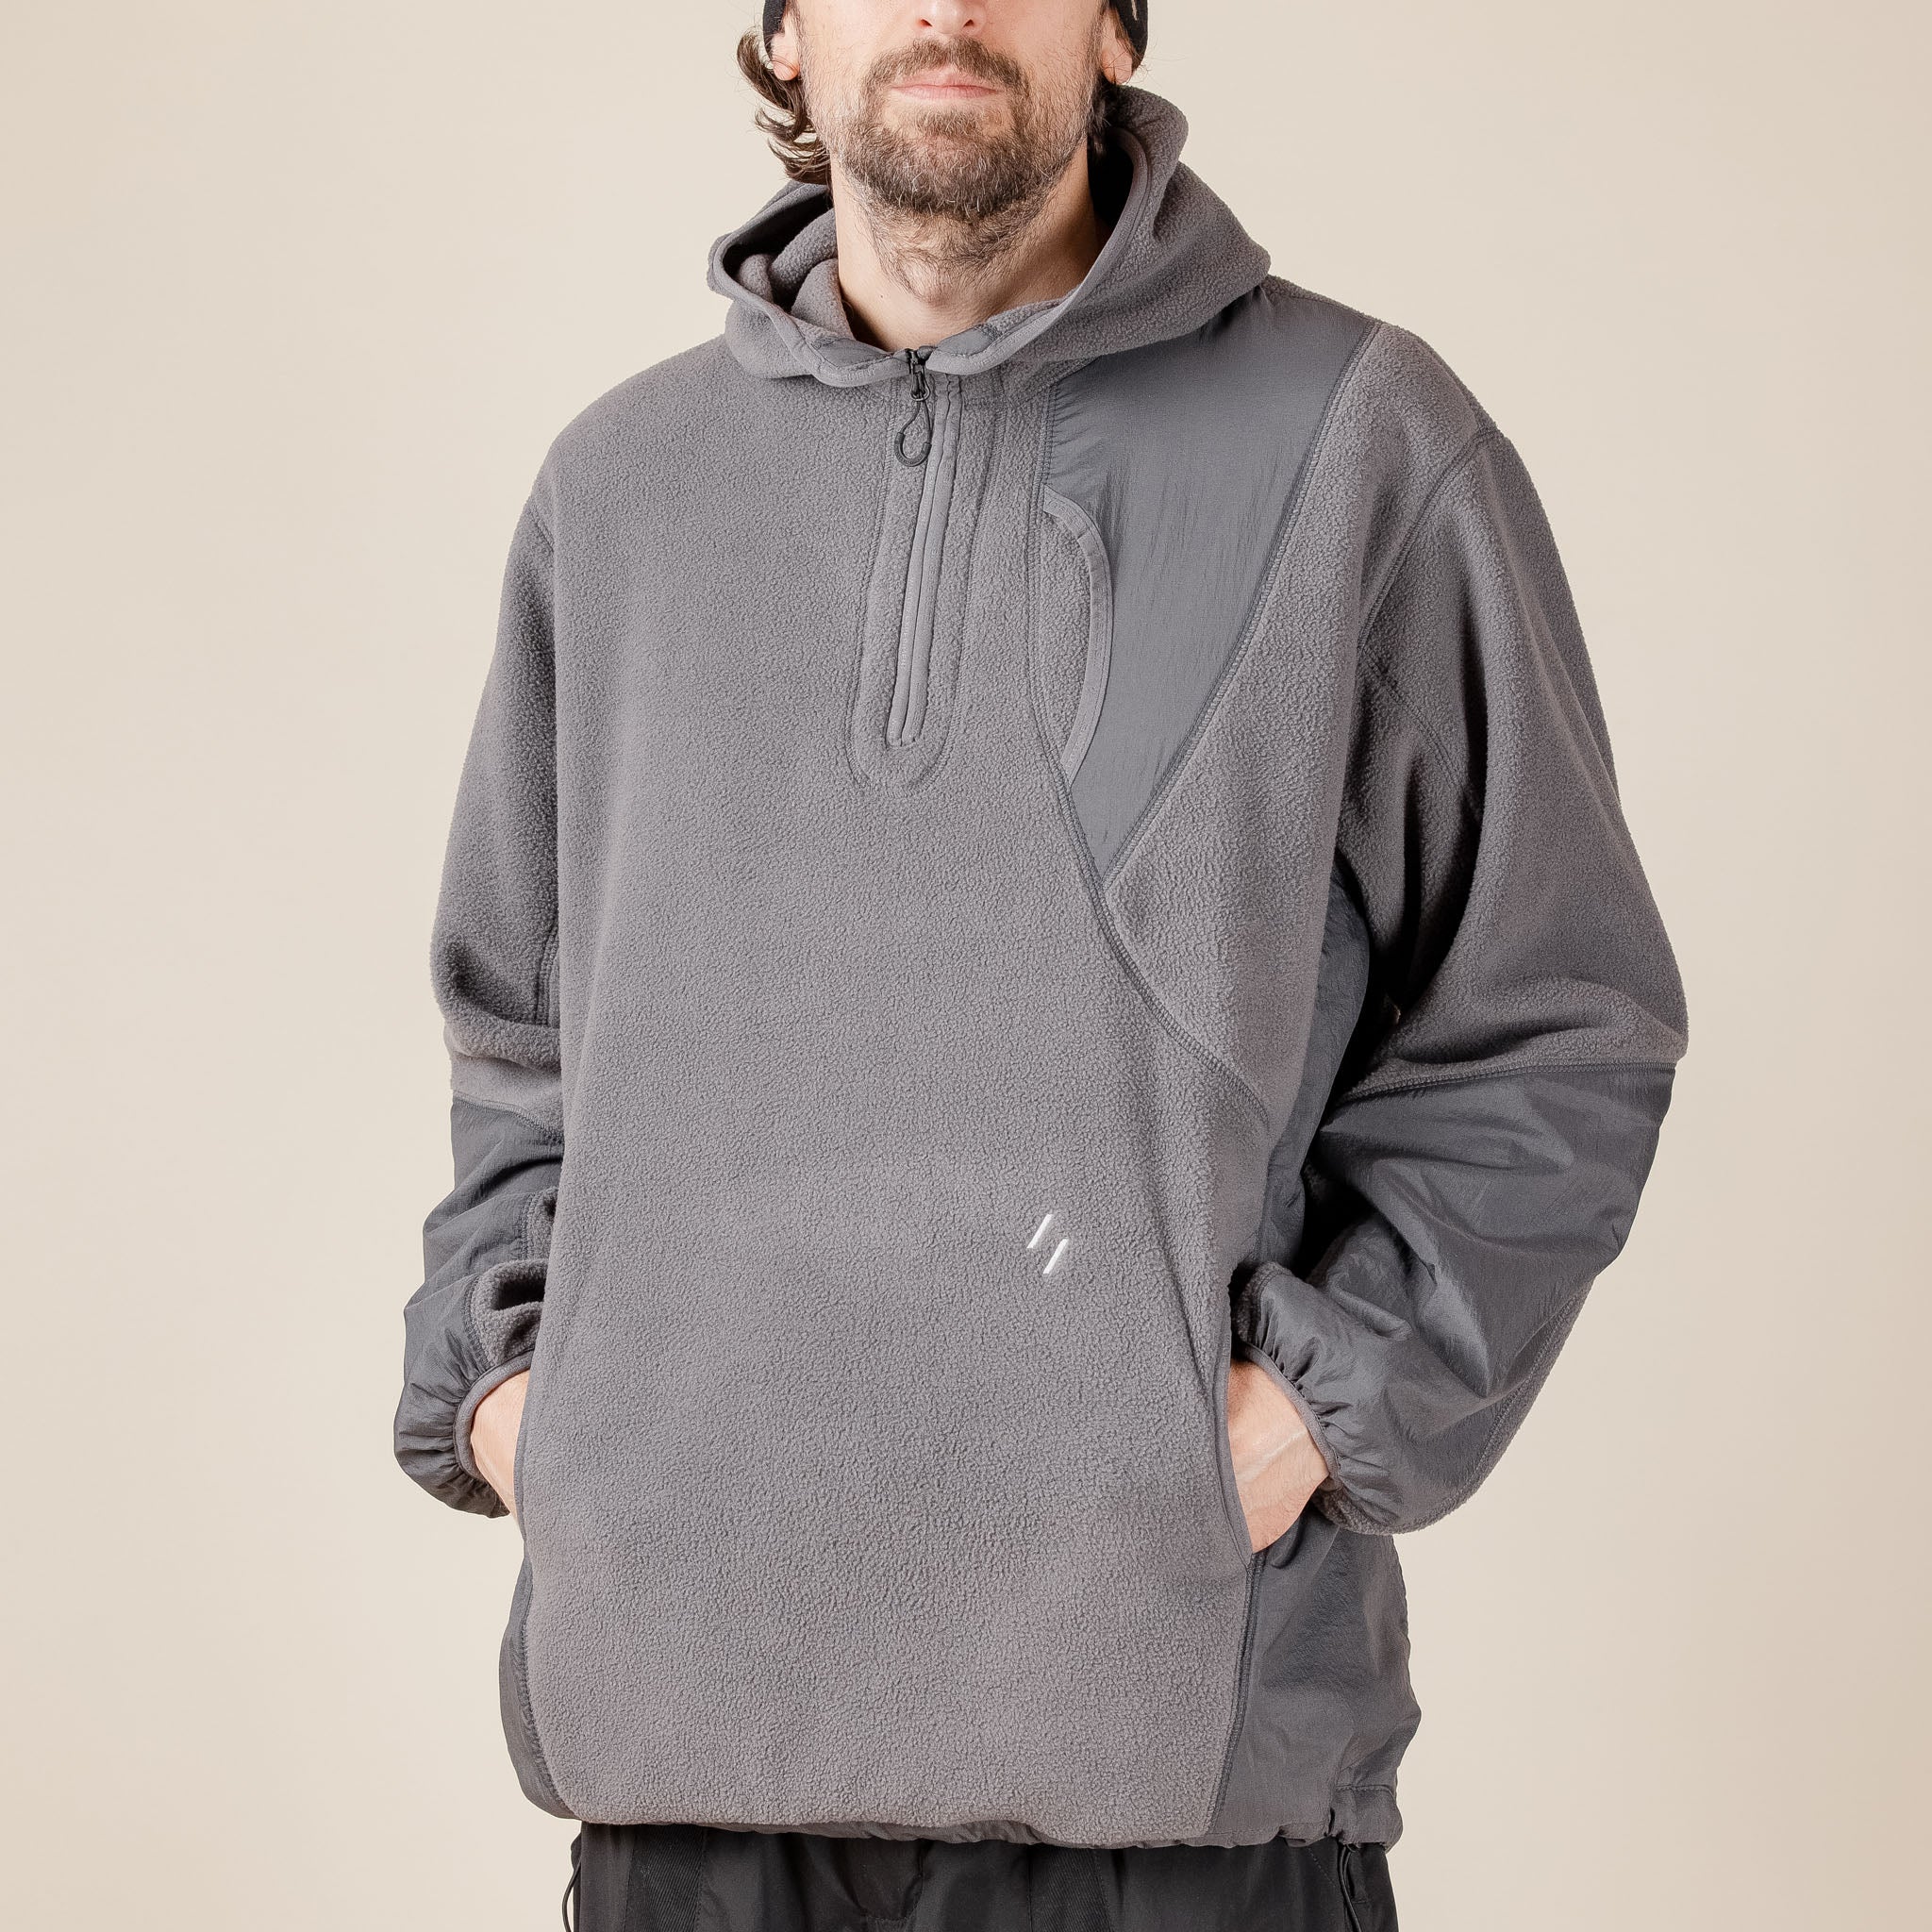 Welter Experiment - WOL037 Explore Fleece Pullover Hoodie - Charcoal Grey